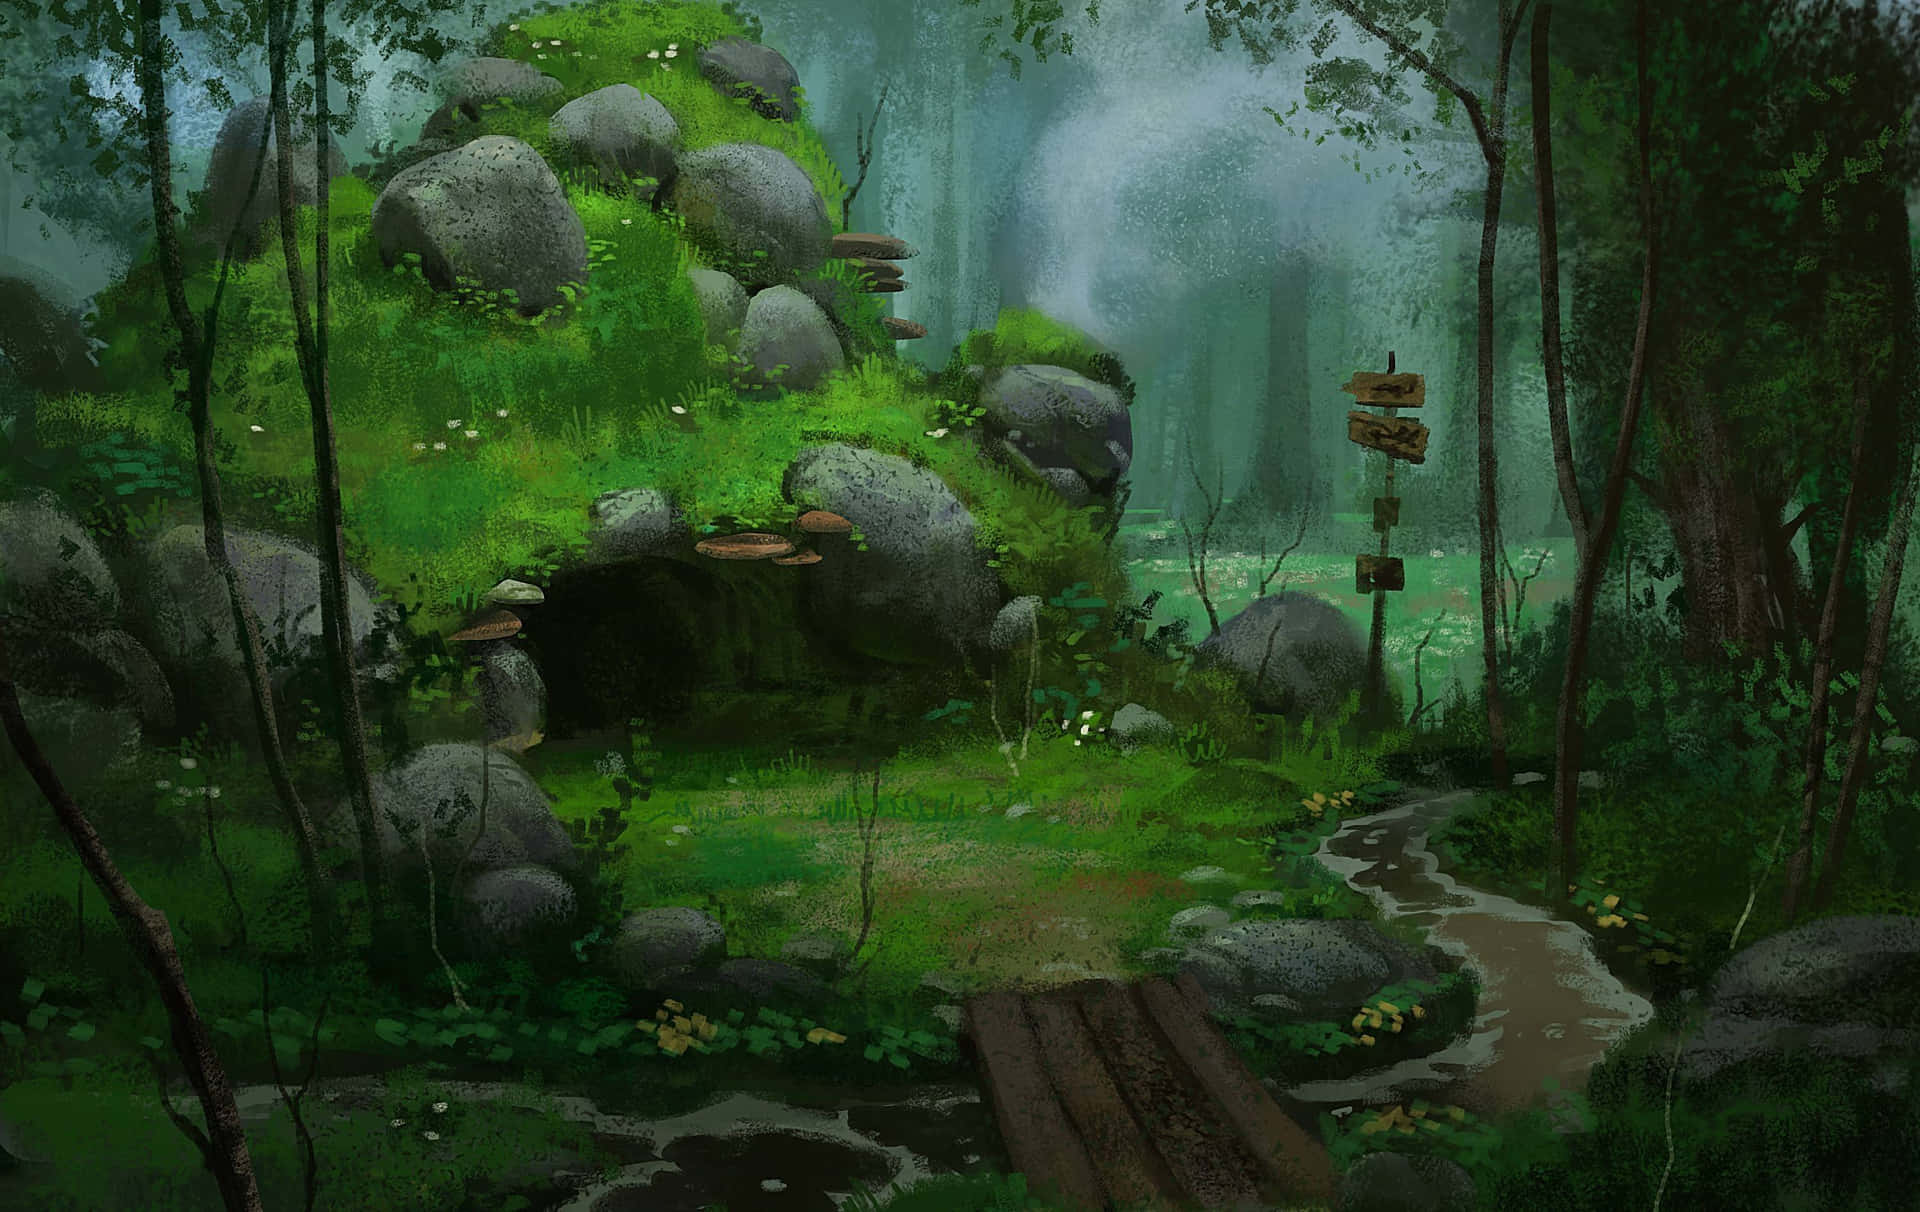 A beautiful and surreal Anime Forest scene